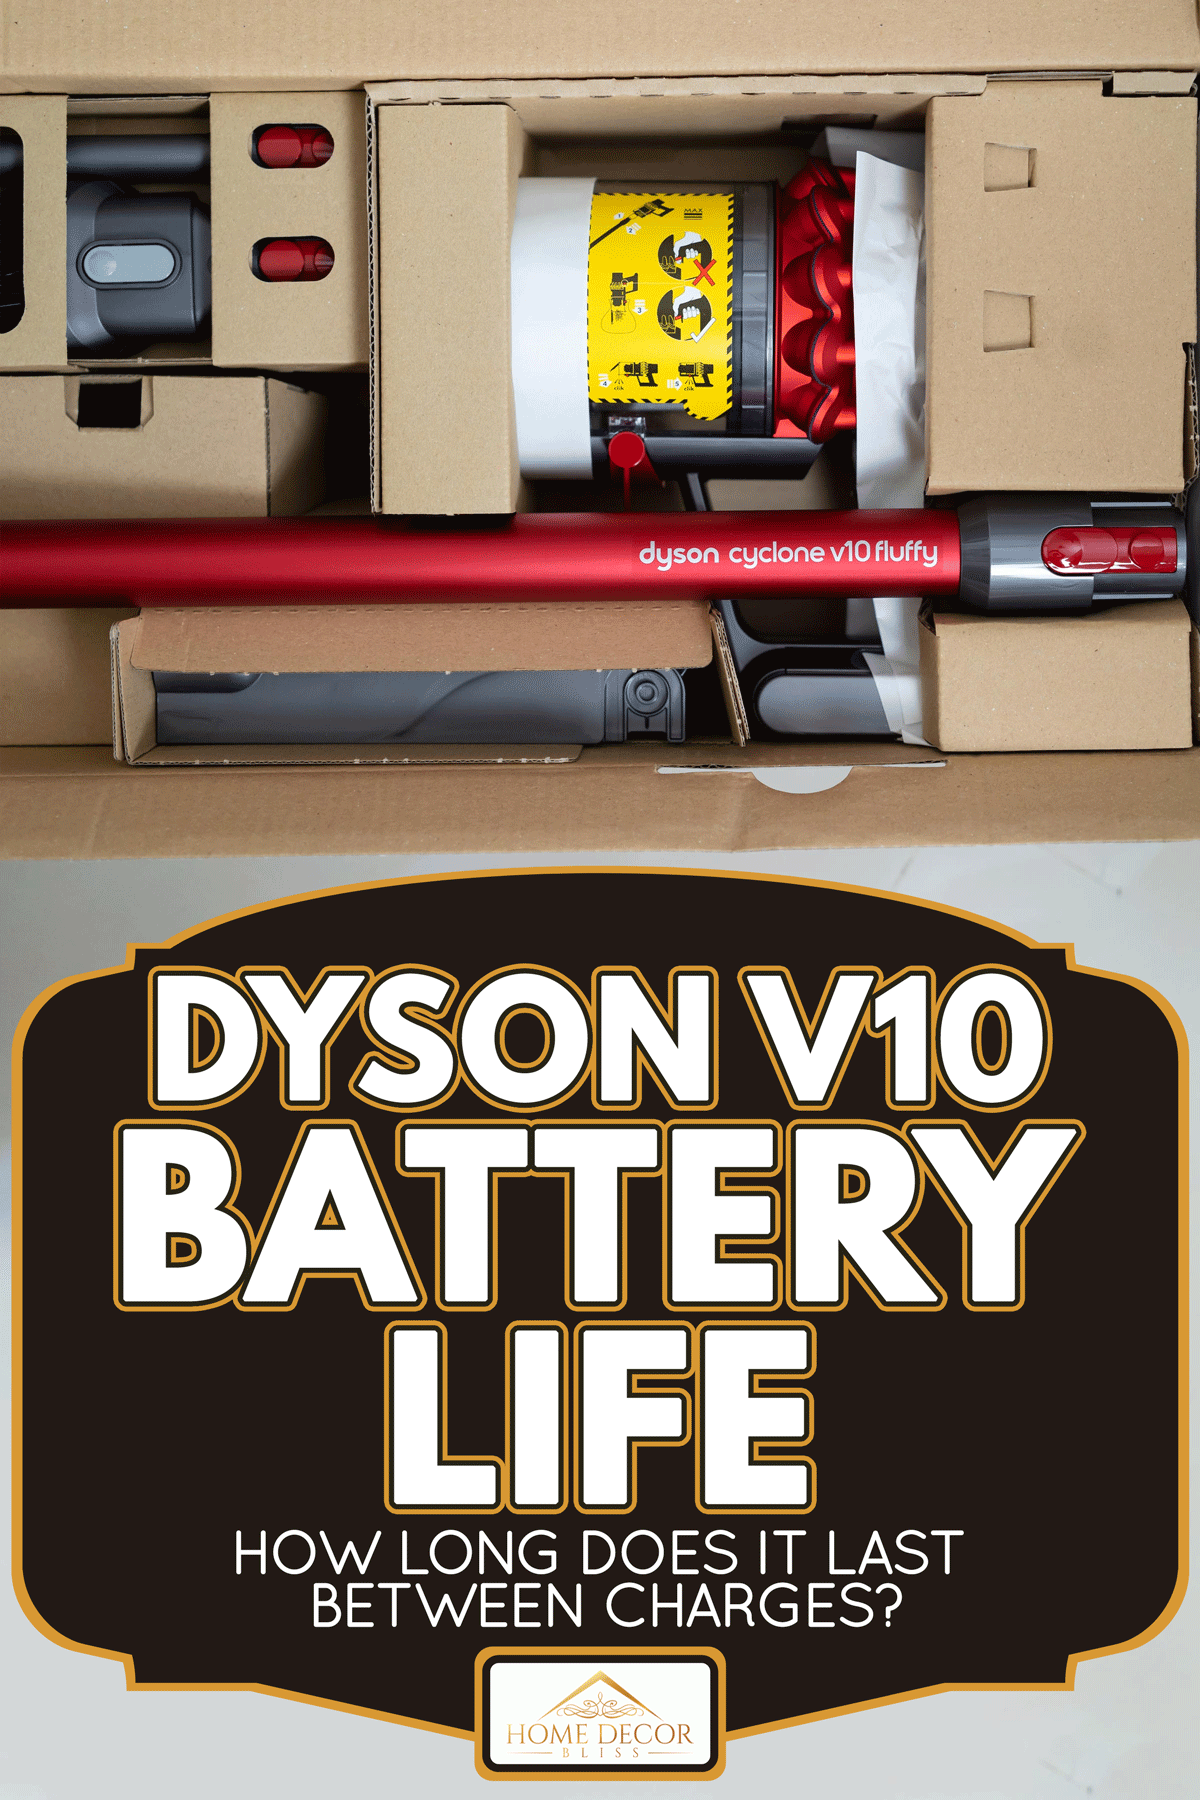 Open box of new Dyson cyclone V10 fluffy vacuum cleaner, Dyson V10 Battery Life: How Long Does It Last Between Charges?